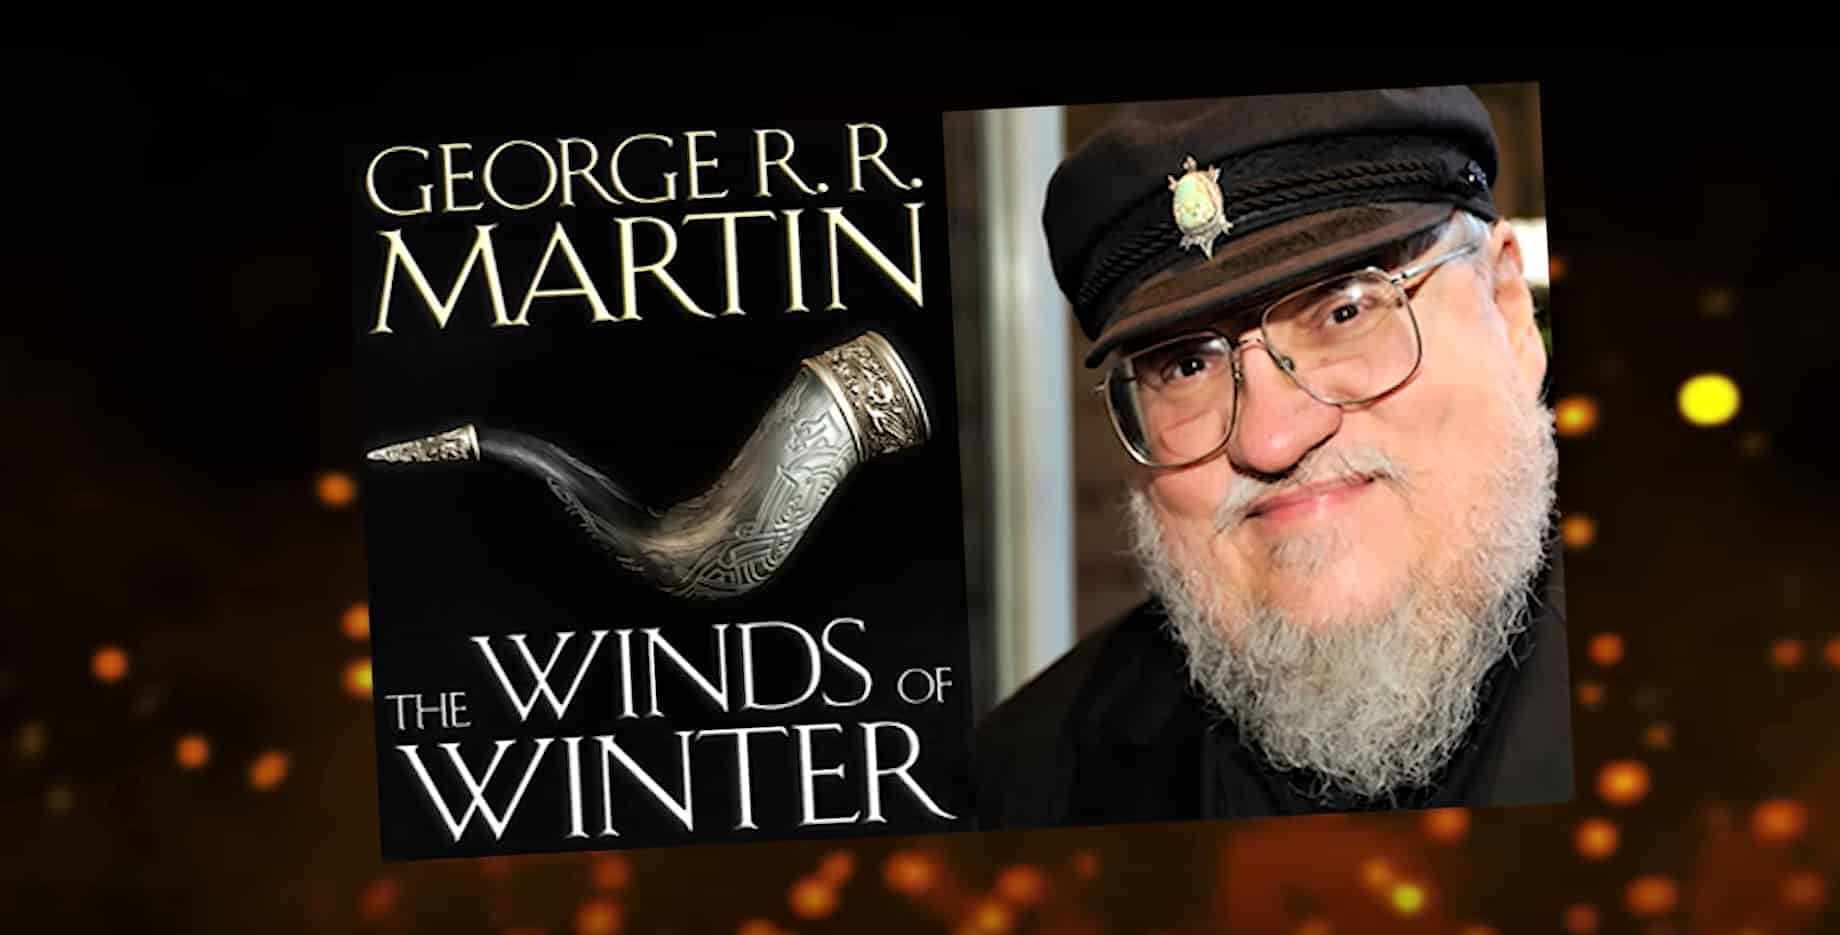 Martin's Promise for The Winds of Winter